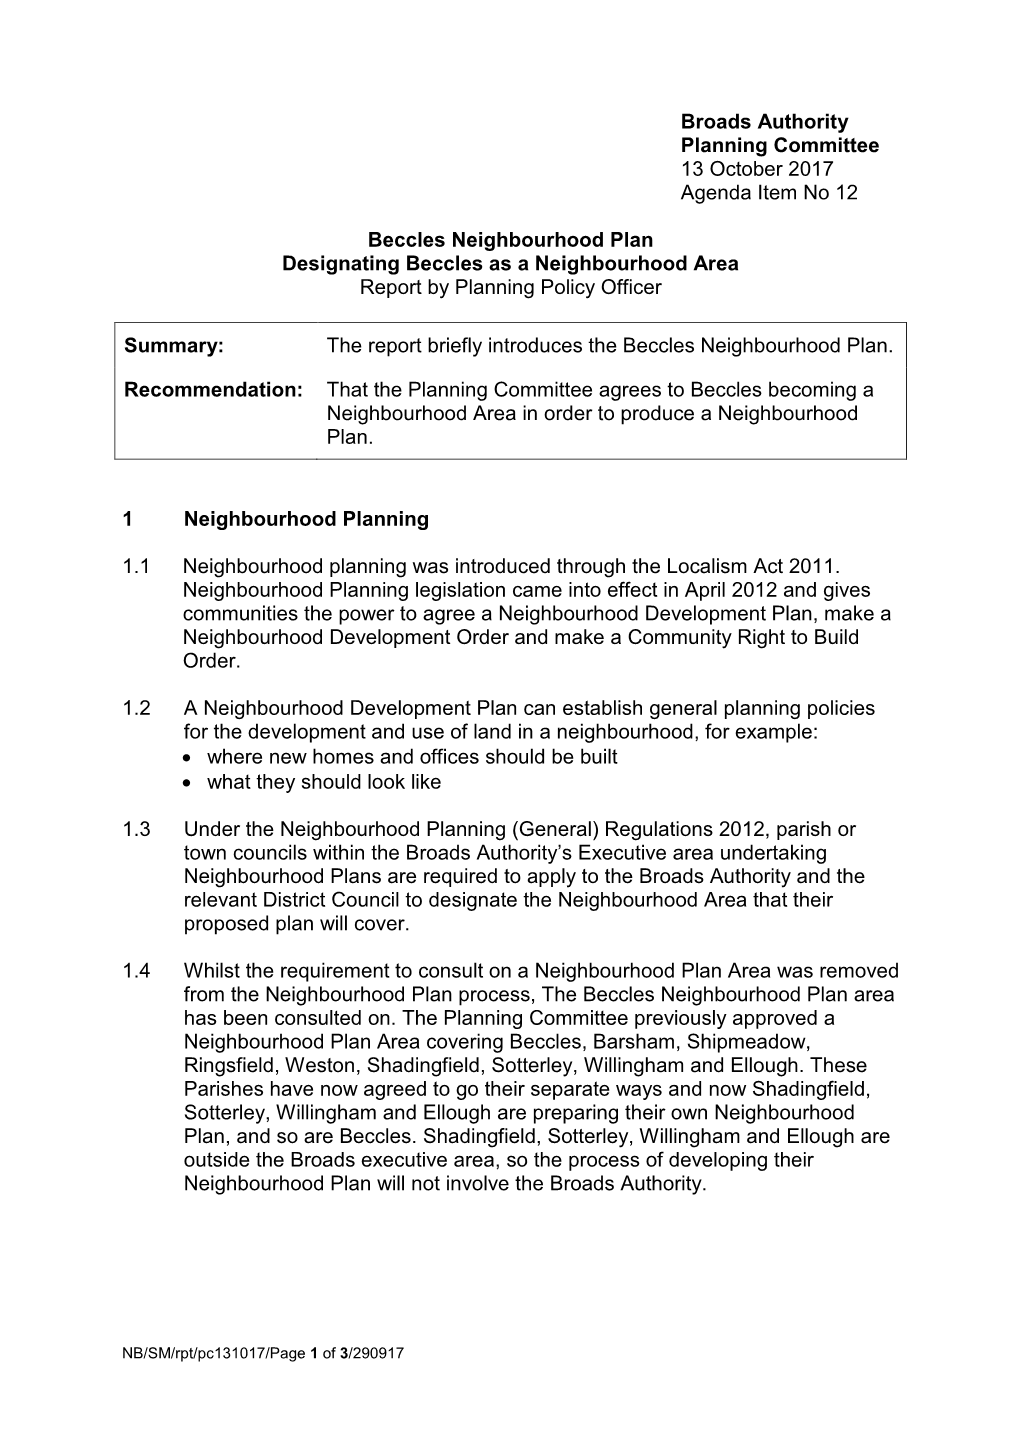 Beccles Neighbourhood Plan Designating Beccles As a Neighbourhood Area Report by Planning Policy Officer